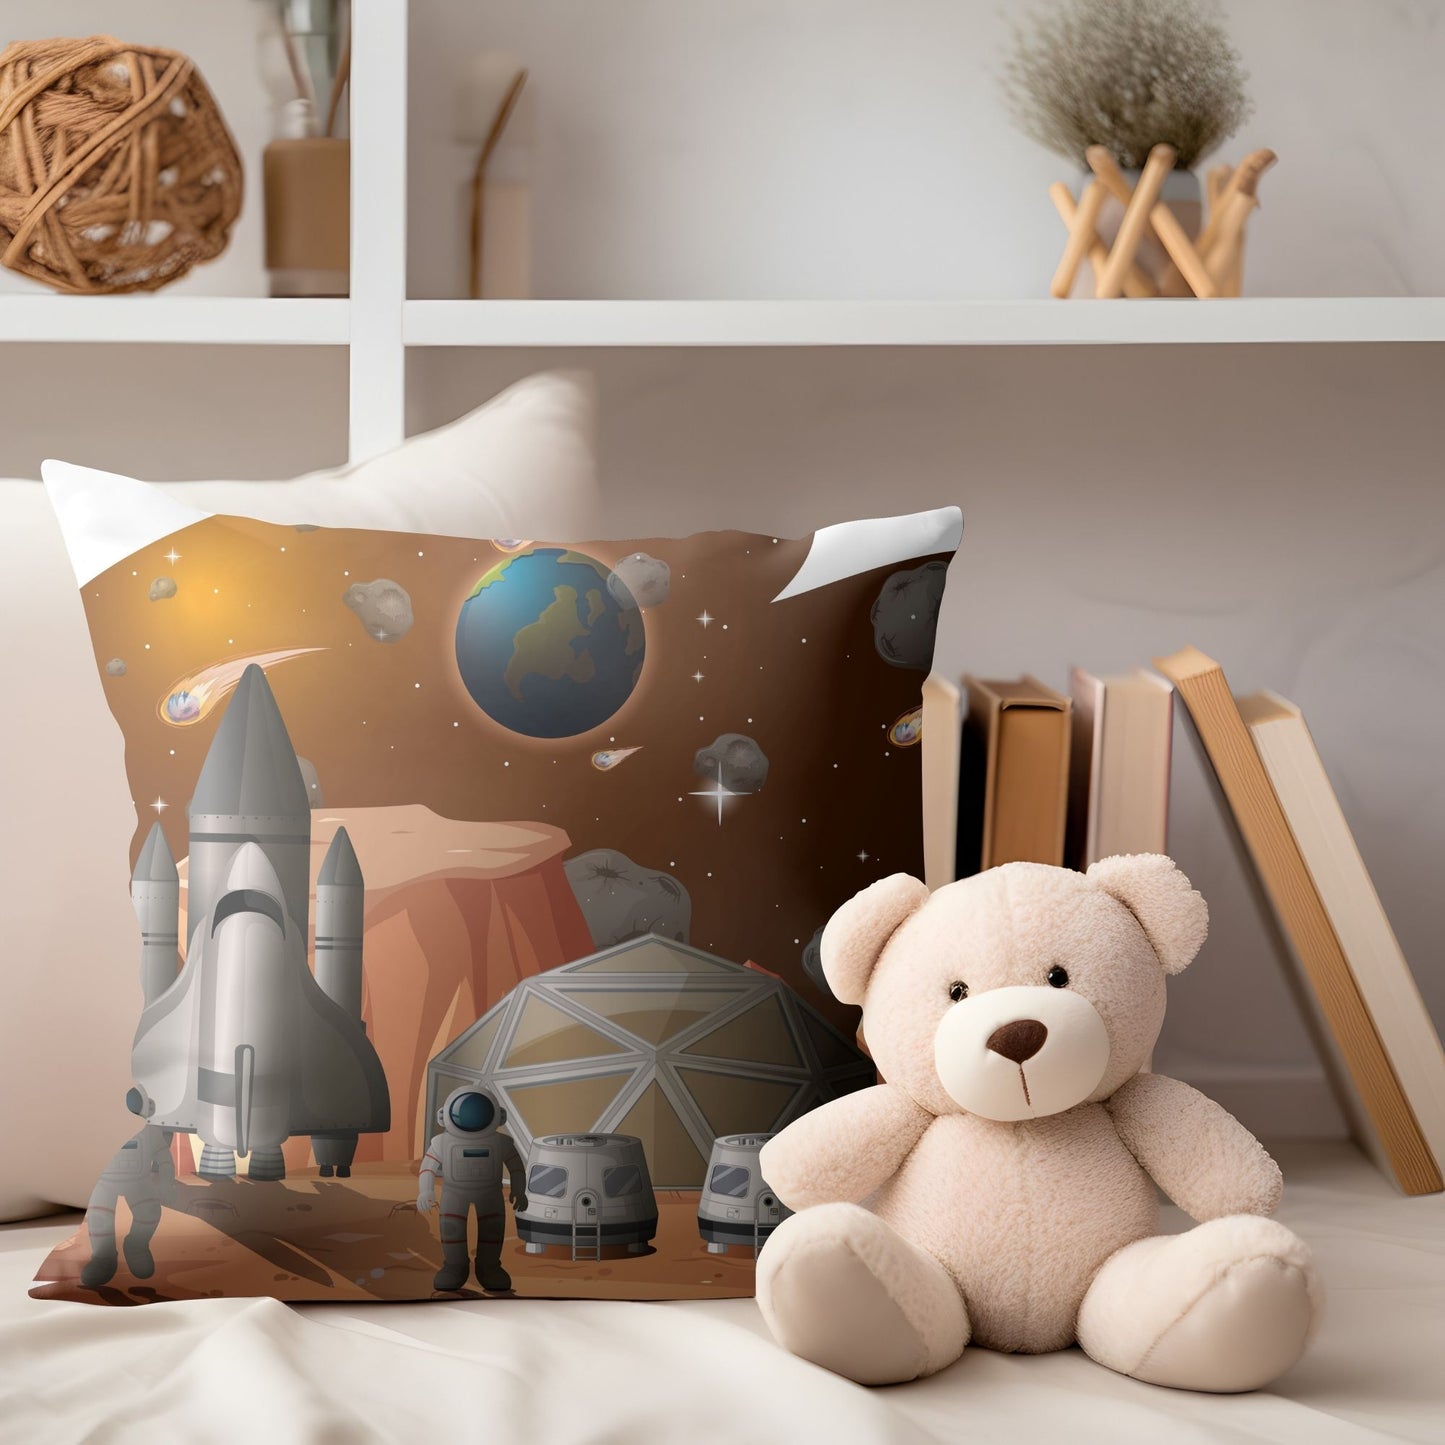 Fun and imaginative kids pillow showcasing astronauts and spacecraft for bedtime adventures.